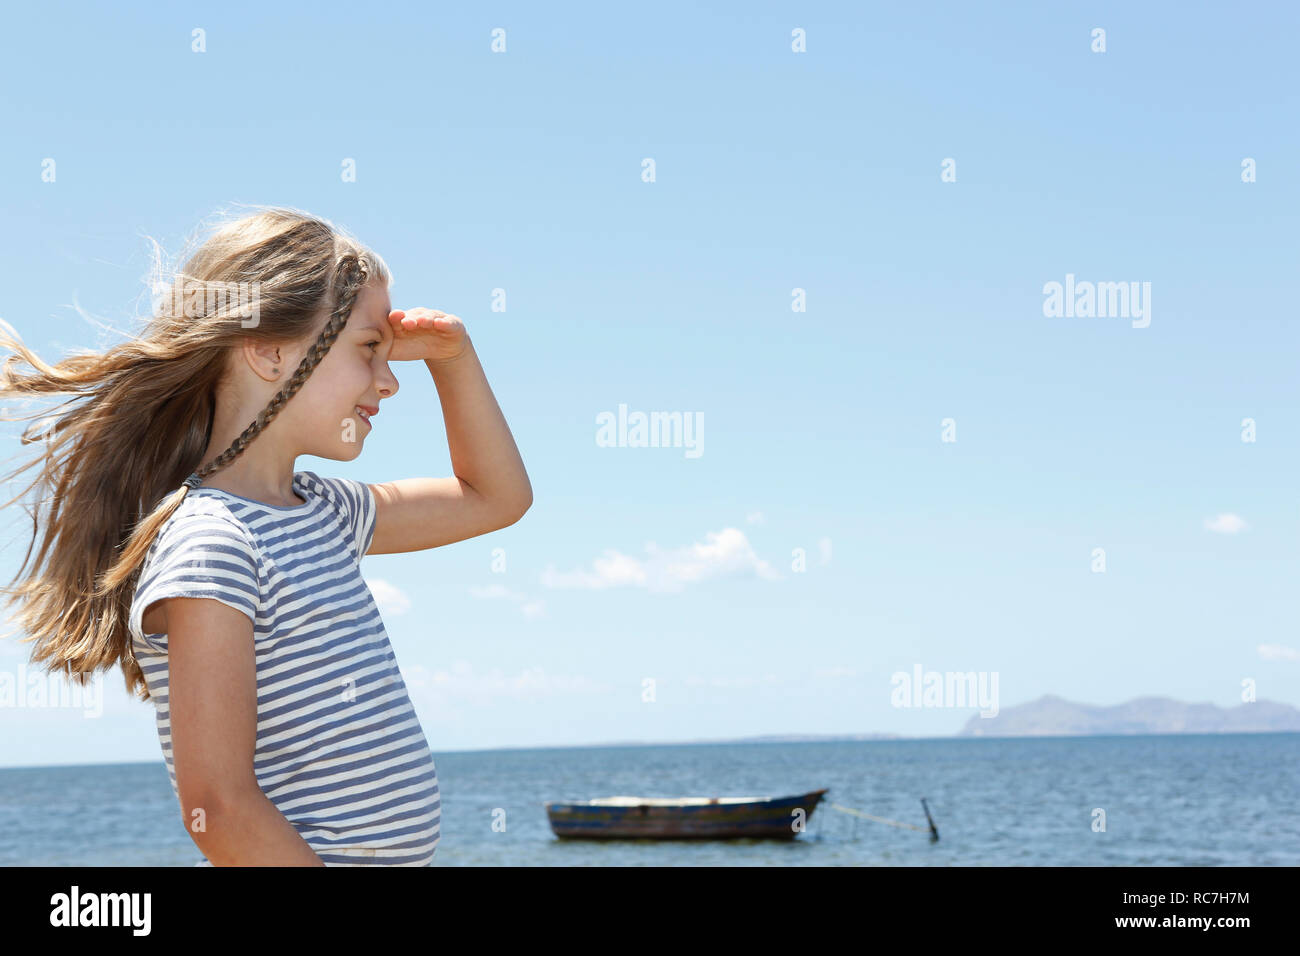 Girl with long blond hair looking out from beach, Trapani, Sicily, Italy Stock Photo